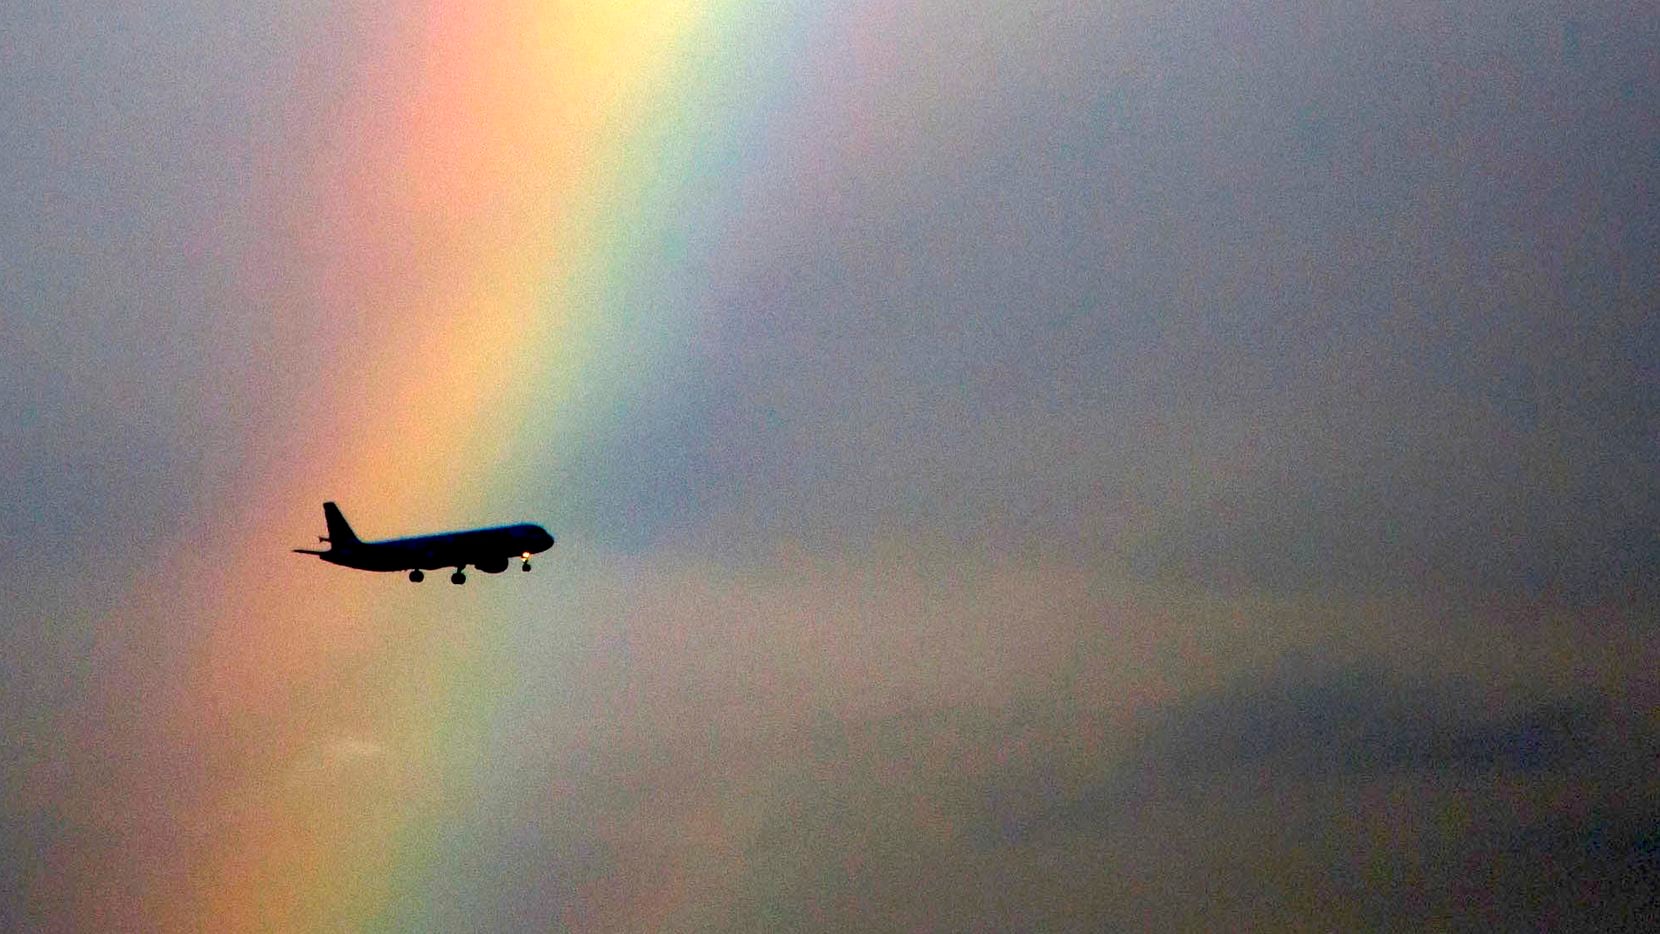 An American Airlines flight passes in front of partial rainbow on approach to landing at Dallas/Fort Worth International Airport on Tuesday, Oct. 3, 2017. 